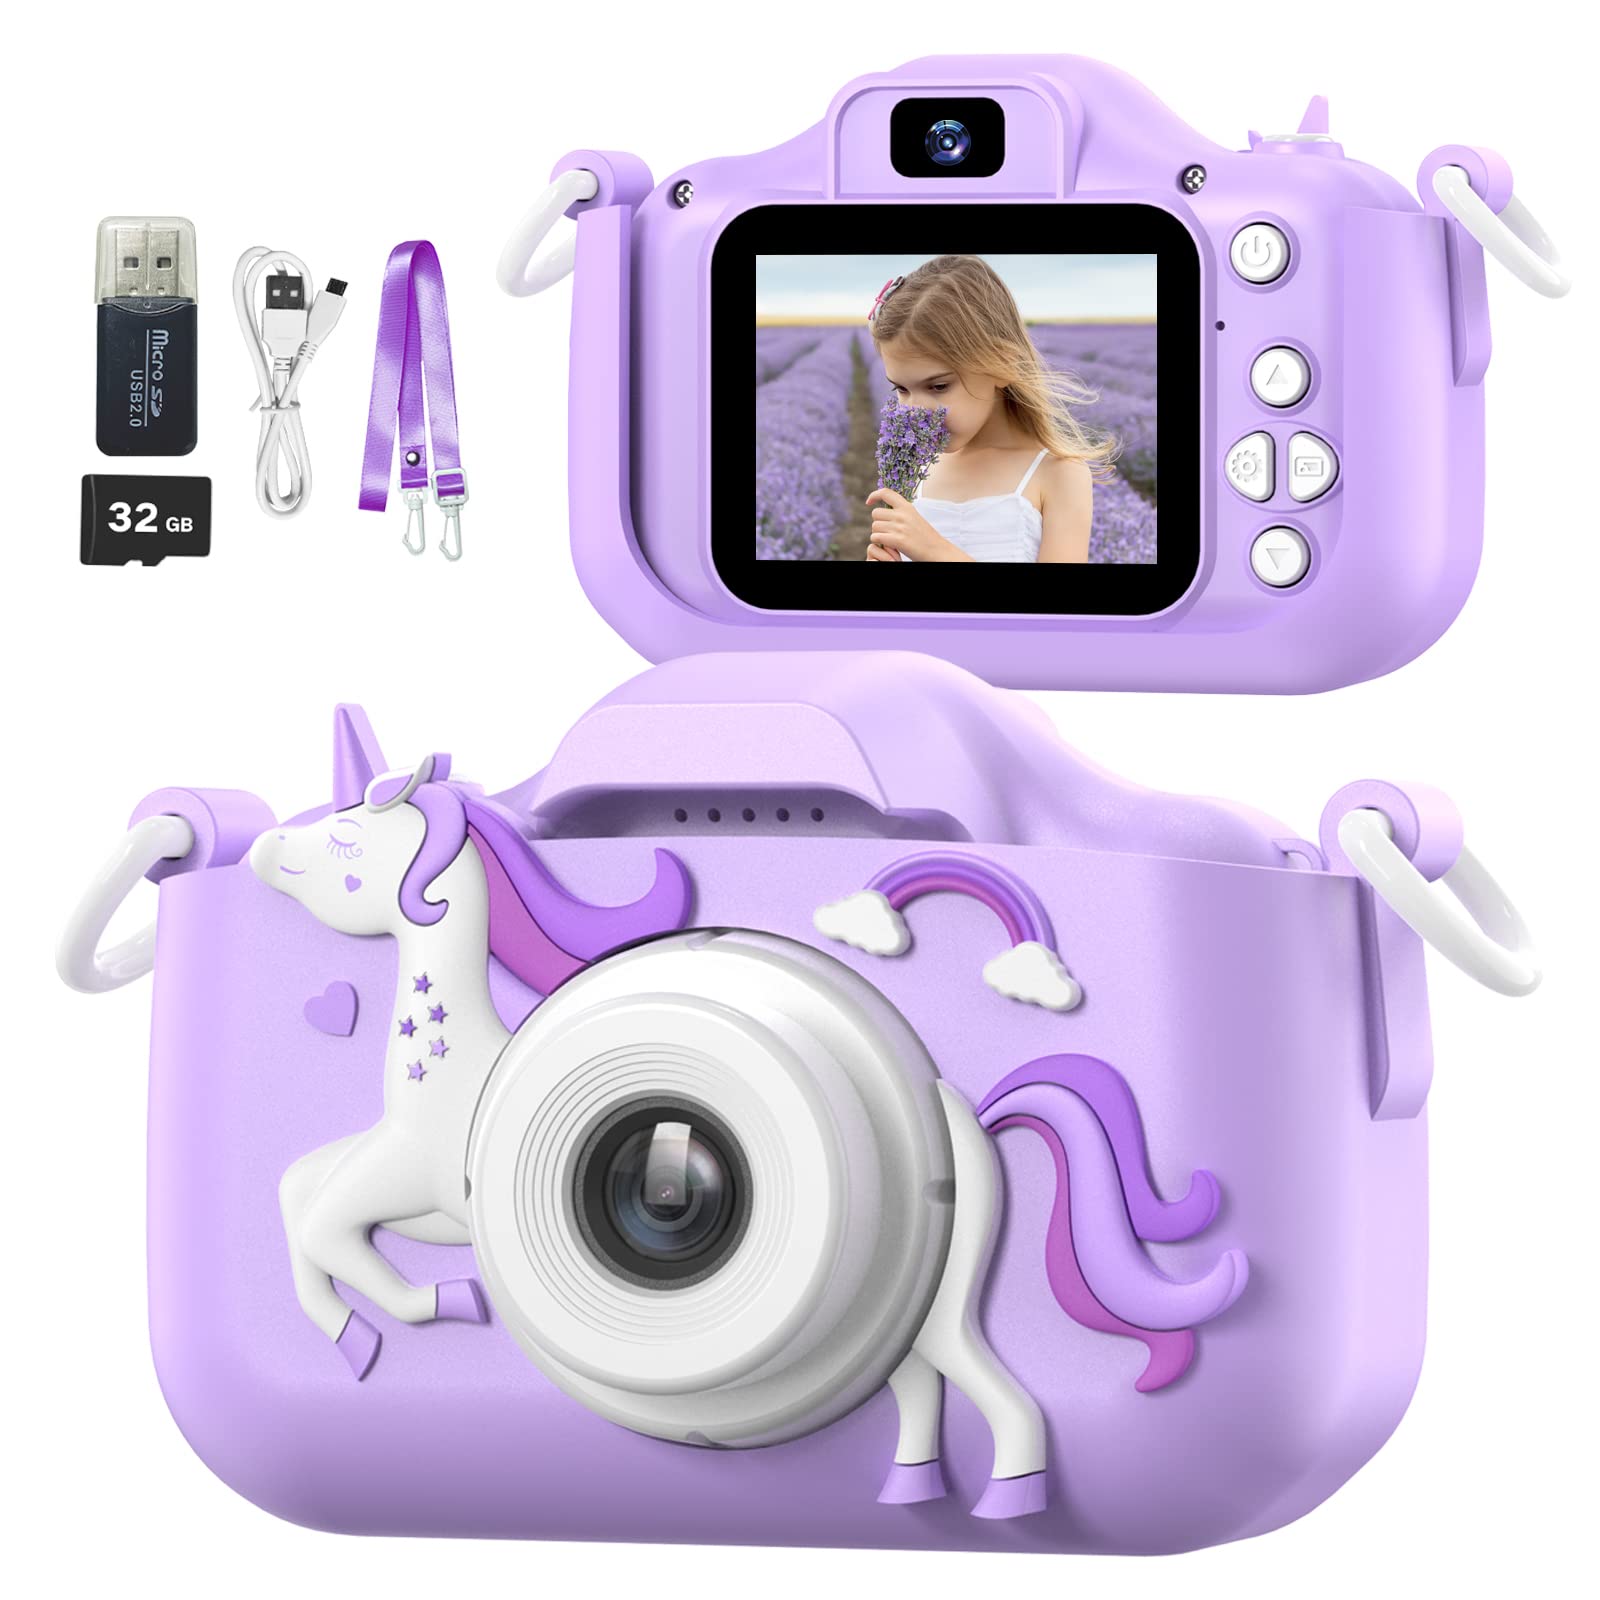 Mgaolo Children's Camera Toys for 3-12 Years Old Kids Boys Girls,HD Digital Video Camera with Protective Silicone Cover,Christmas Birthday Gifts with 32GB SD Card (Unicorn Purple)